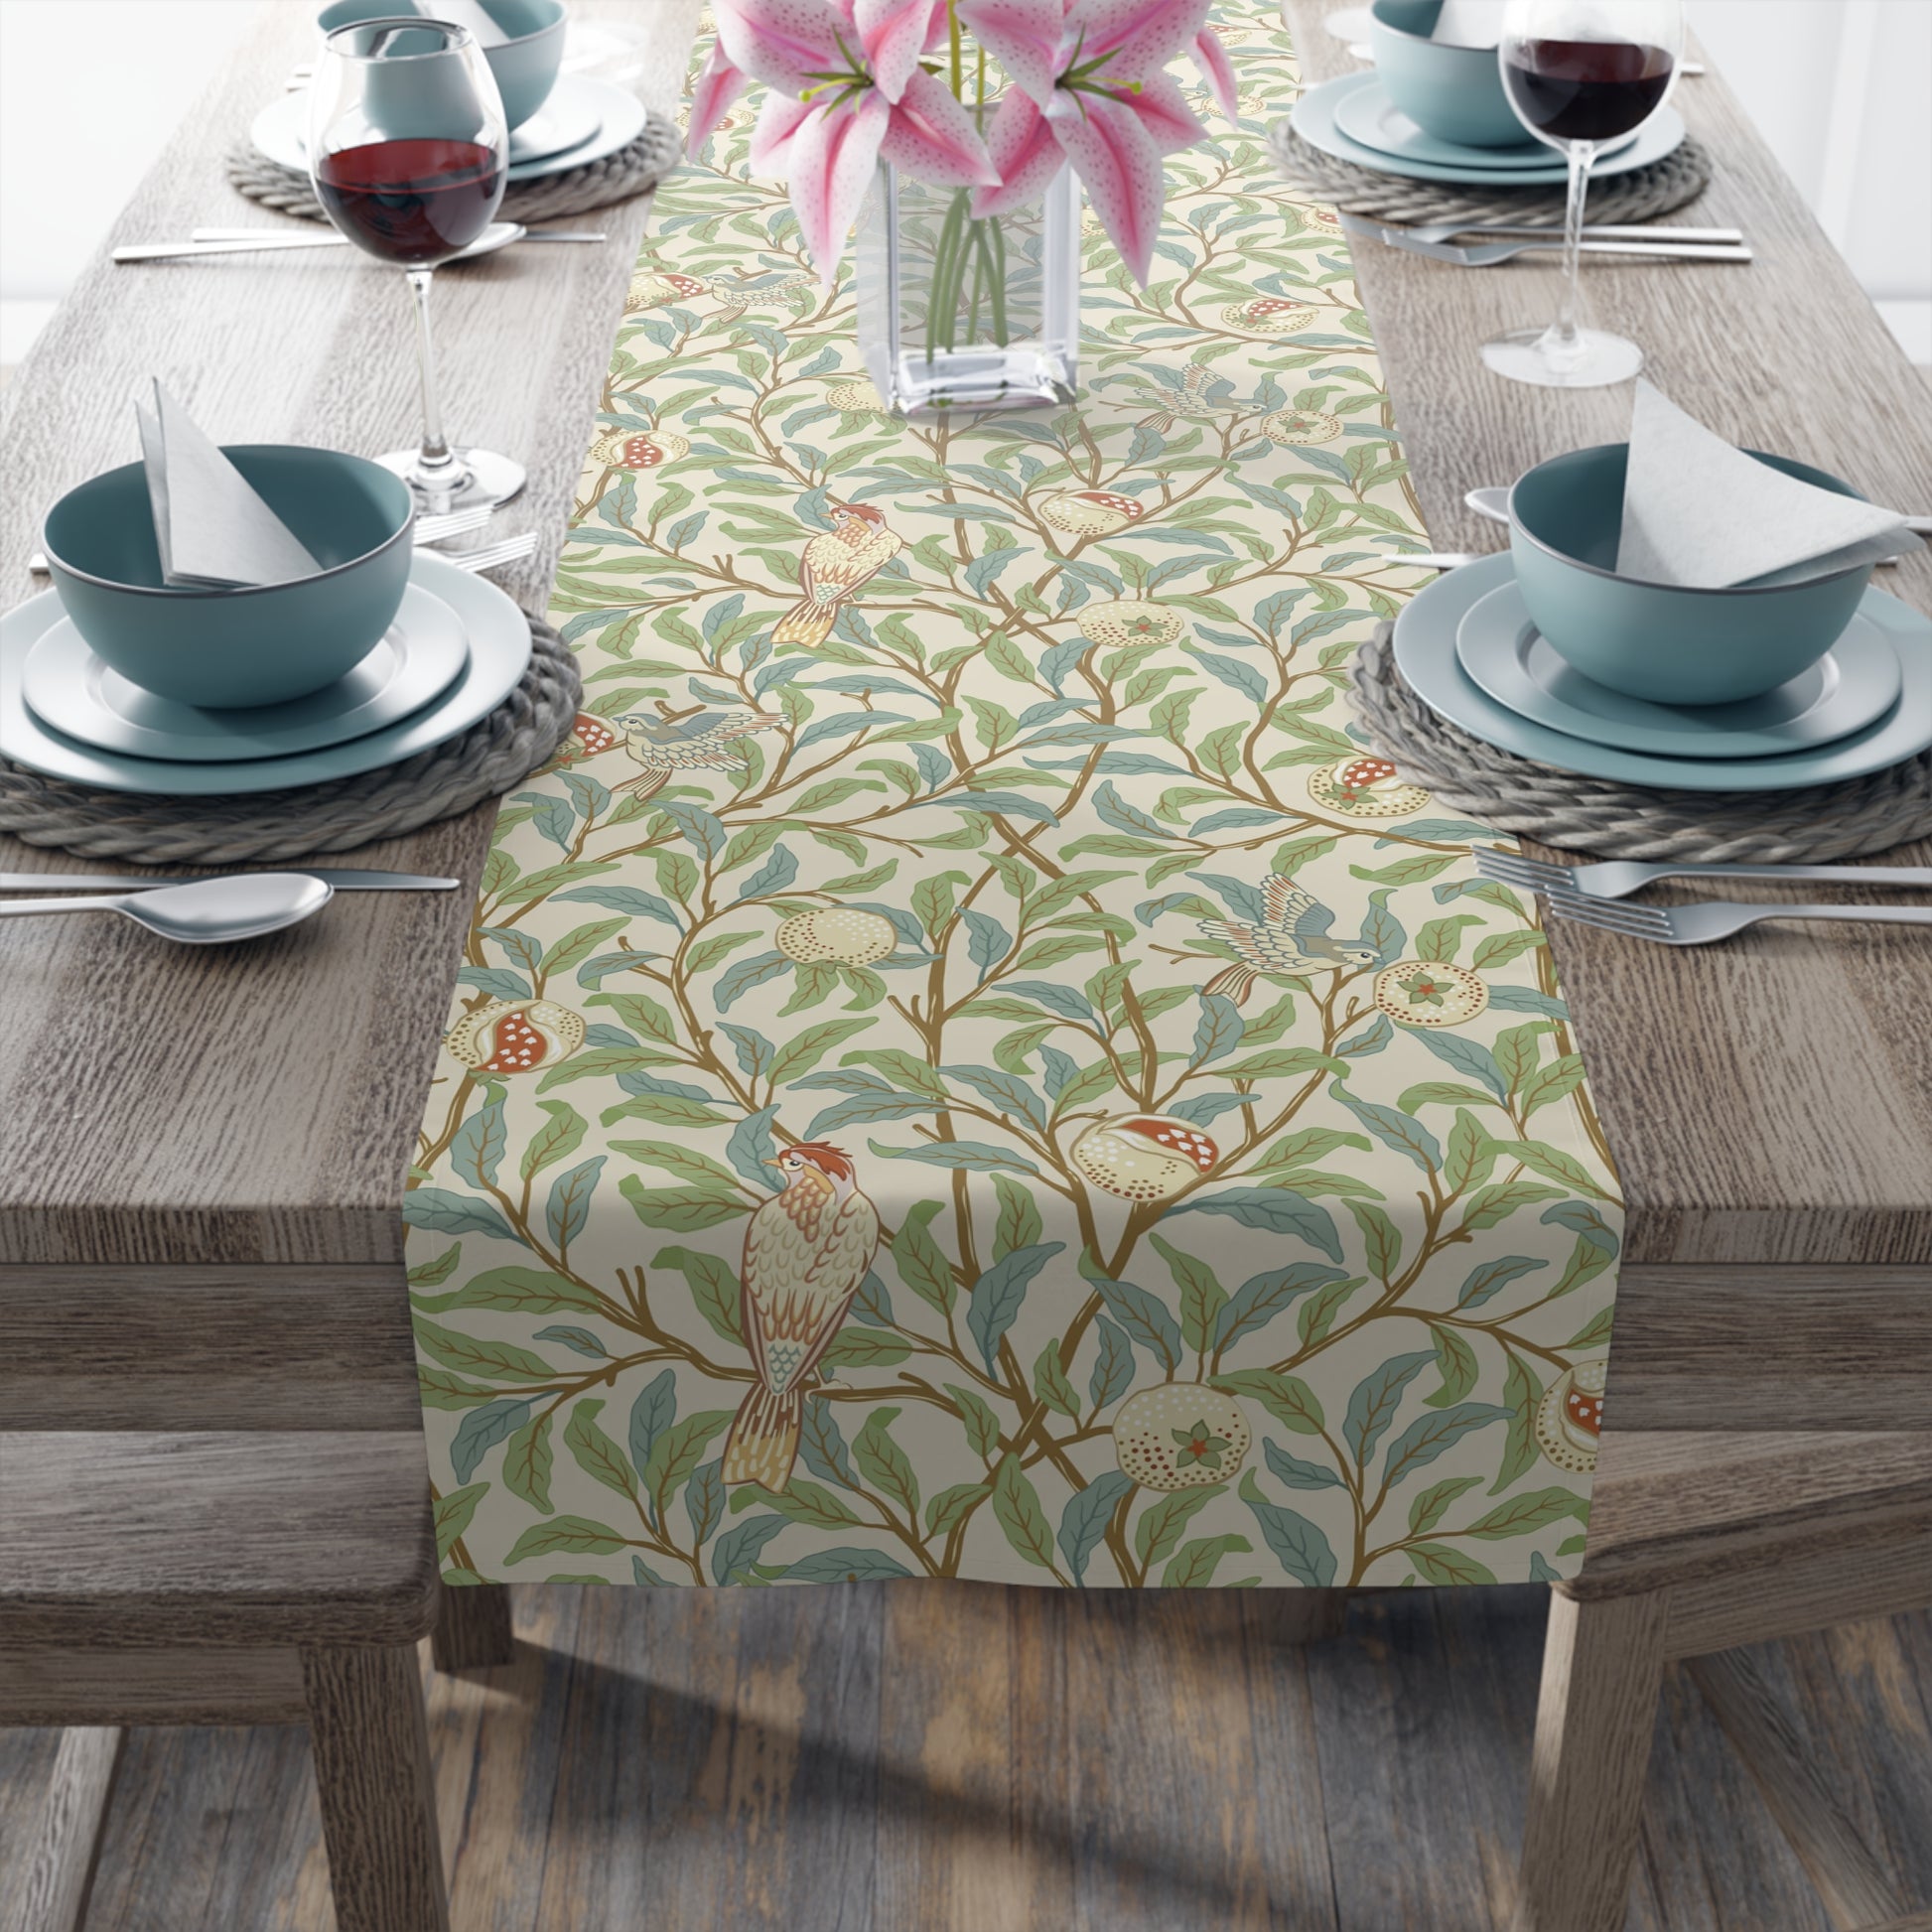 william-morris-co-table-runner-bird-and-pomegranate-collection-parchment-5